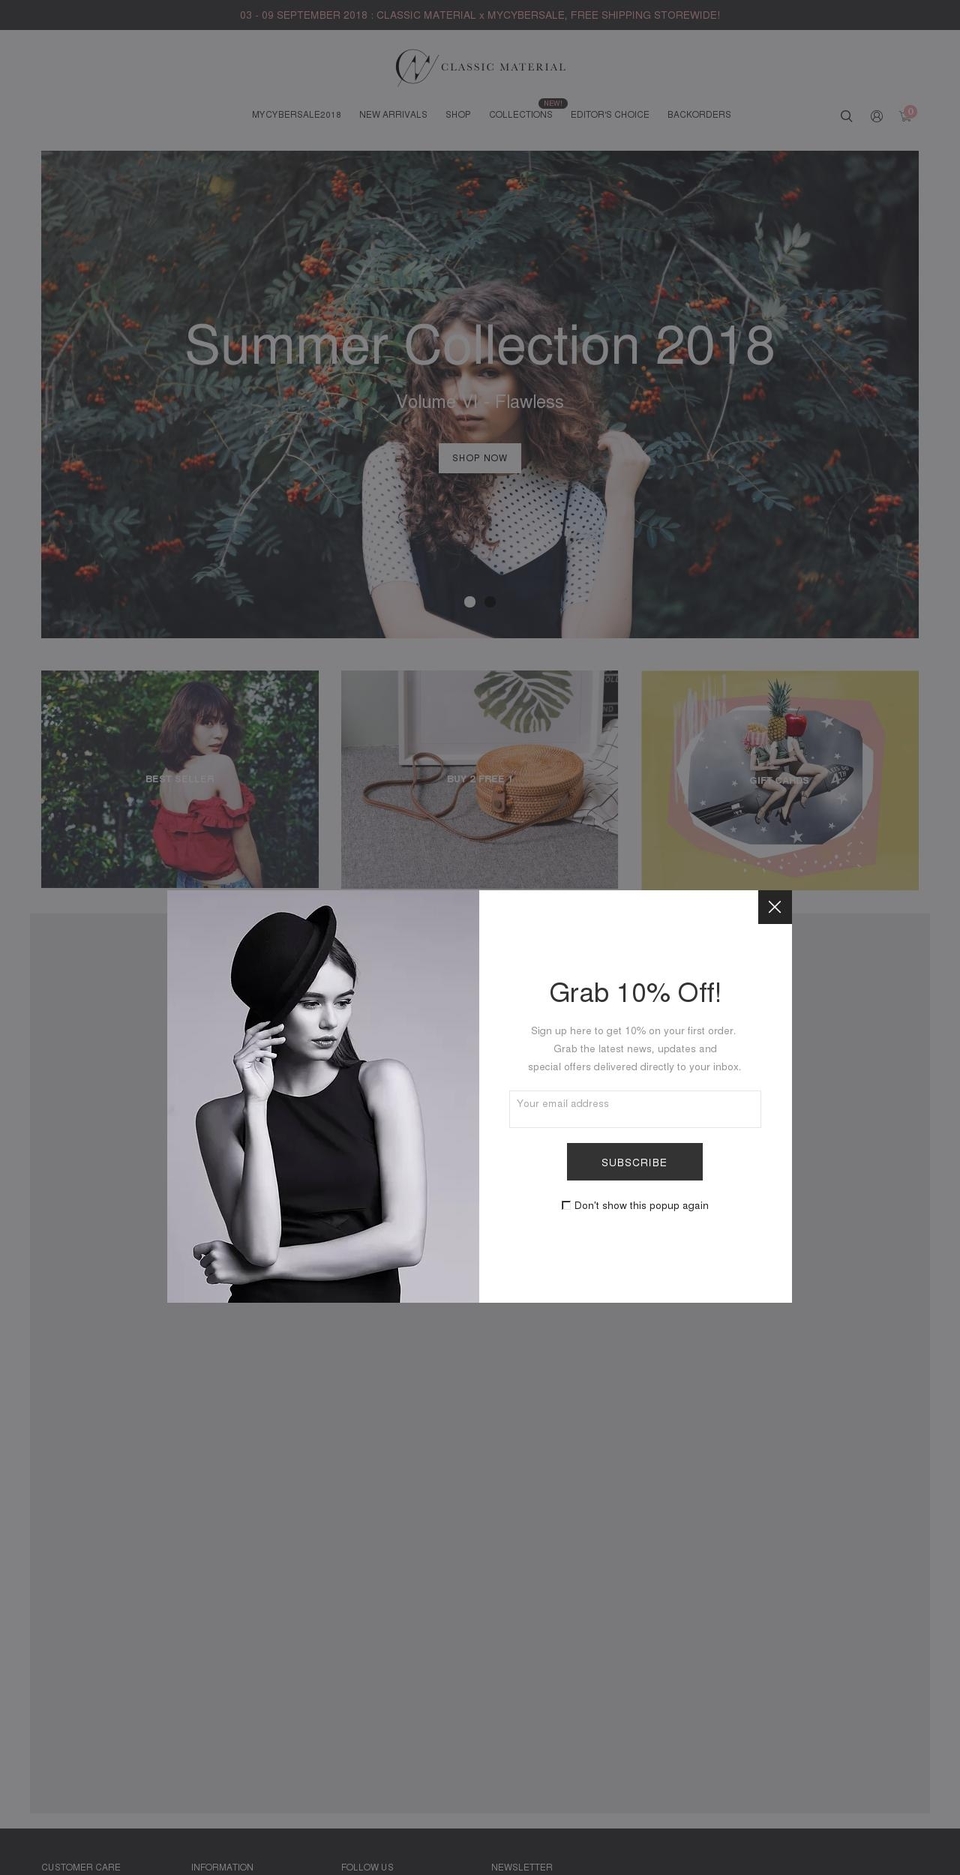 cleversoft-ione-myshopify-3-6-0 Shopify theme site example classic-material.com